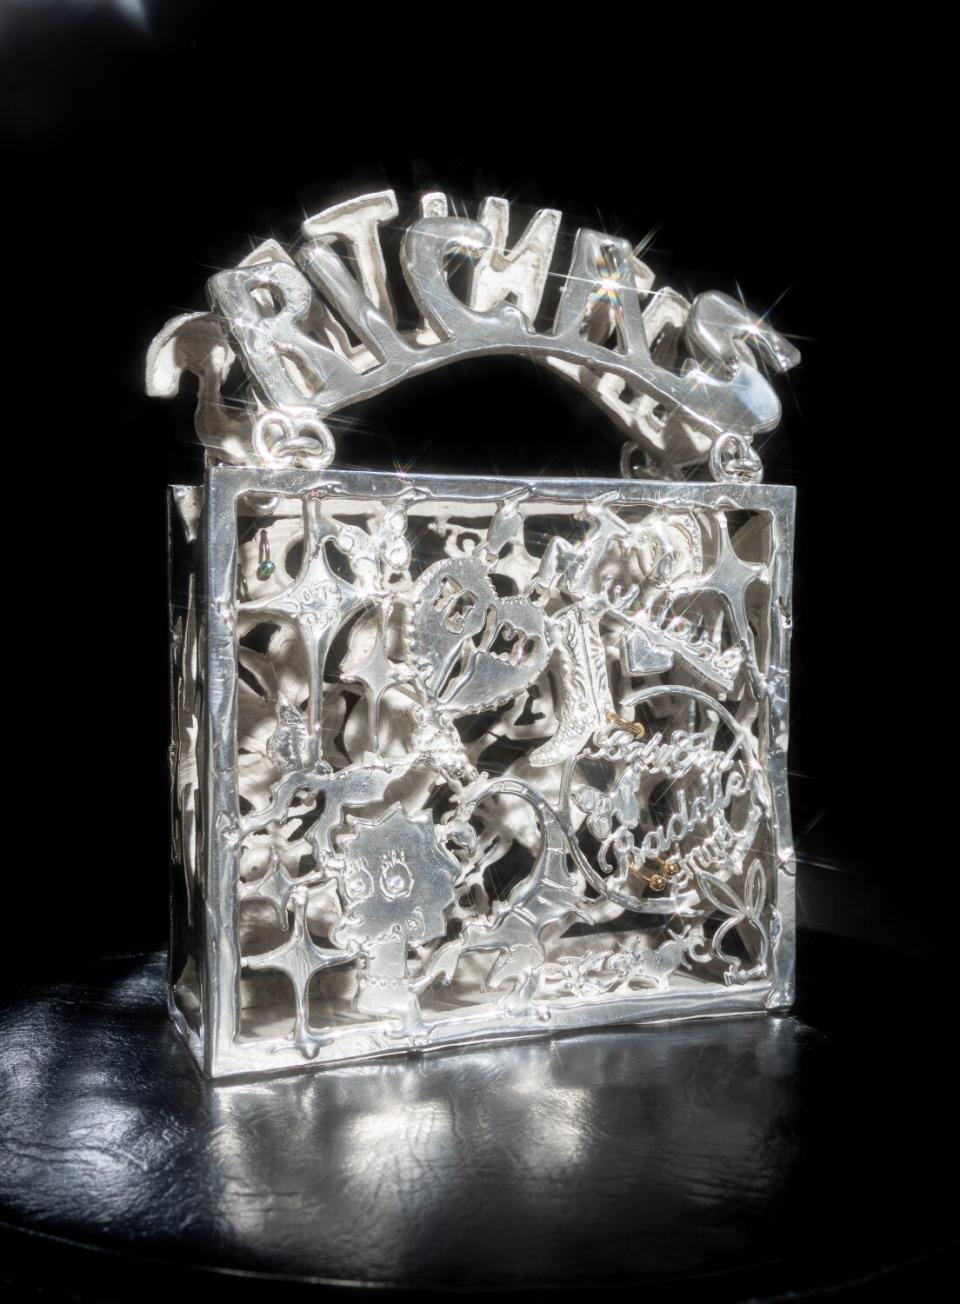 Photo of "KEPERRA" — a sterling silver casted purse made by Georgina Treviño for Image magazine.